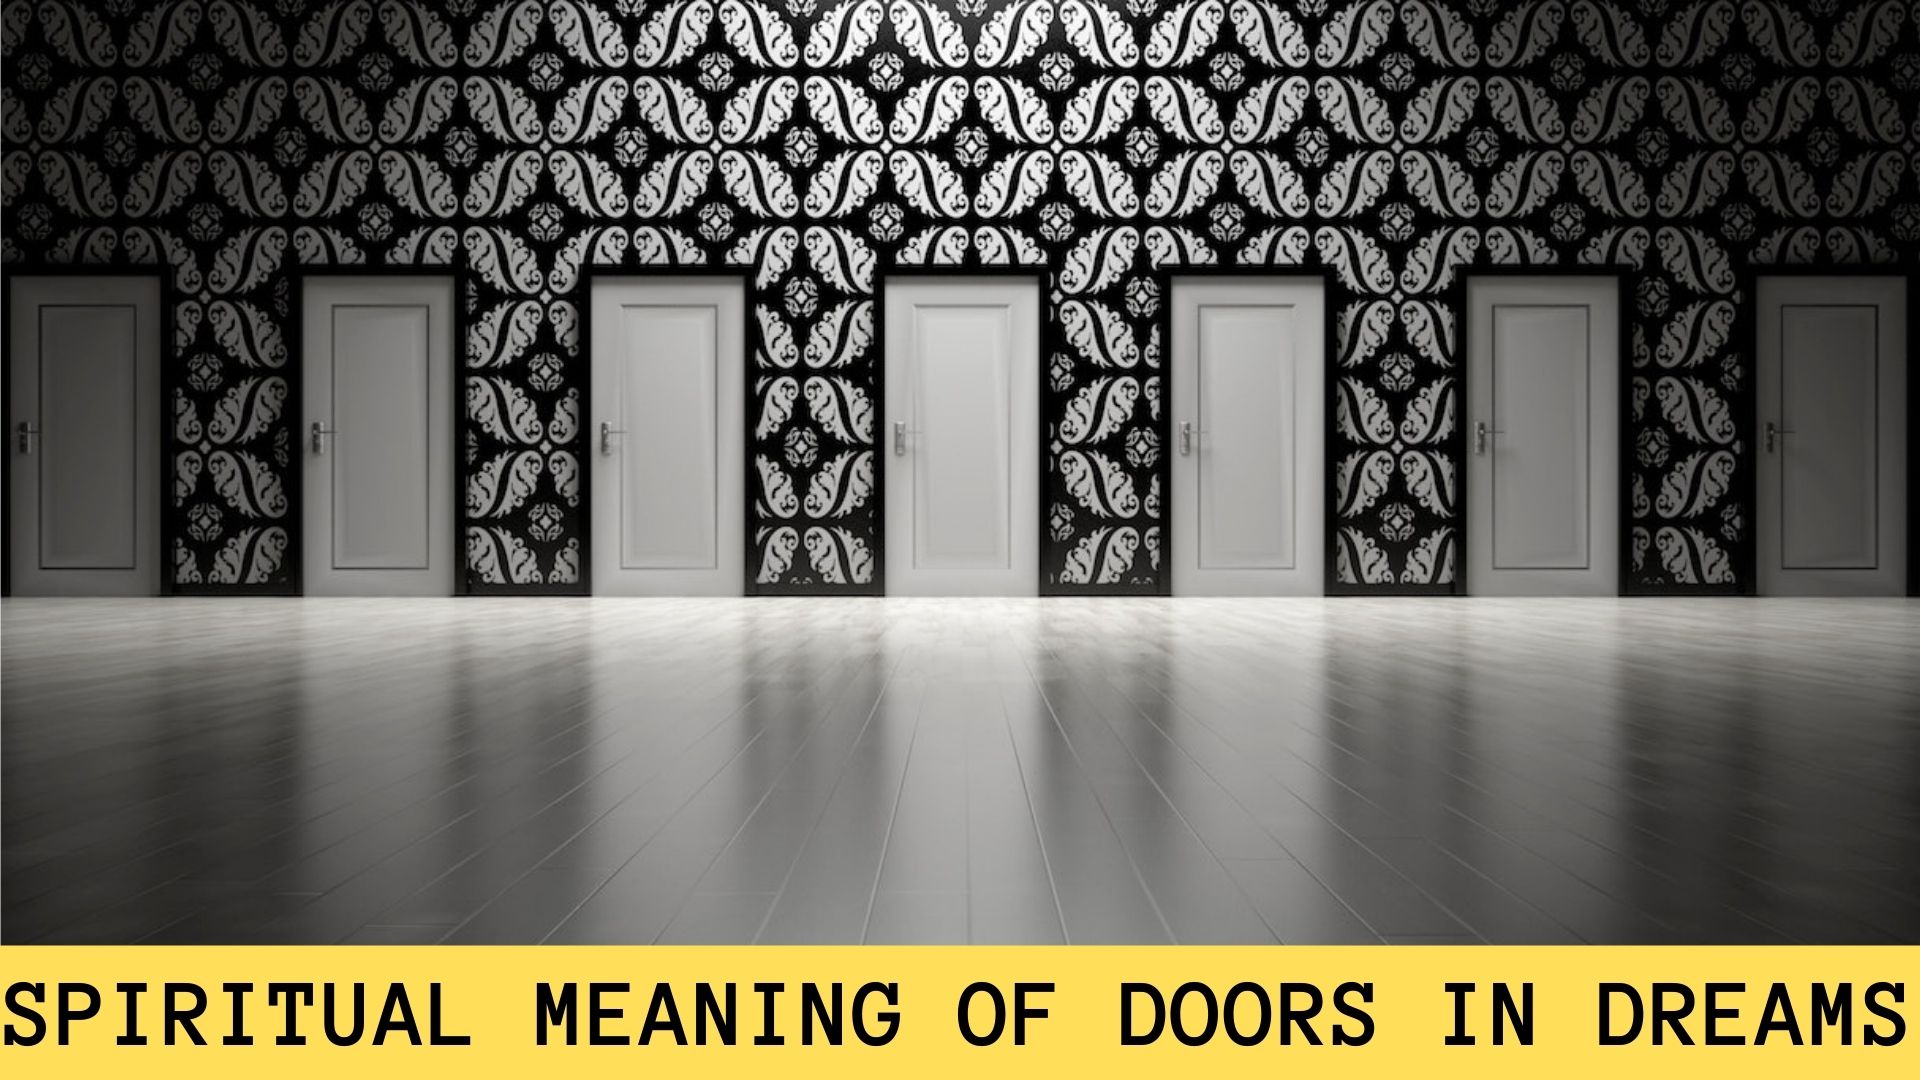 Spiritual Meaning Of Doors In Dreams - Represent Changes And New Opportunities